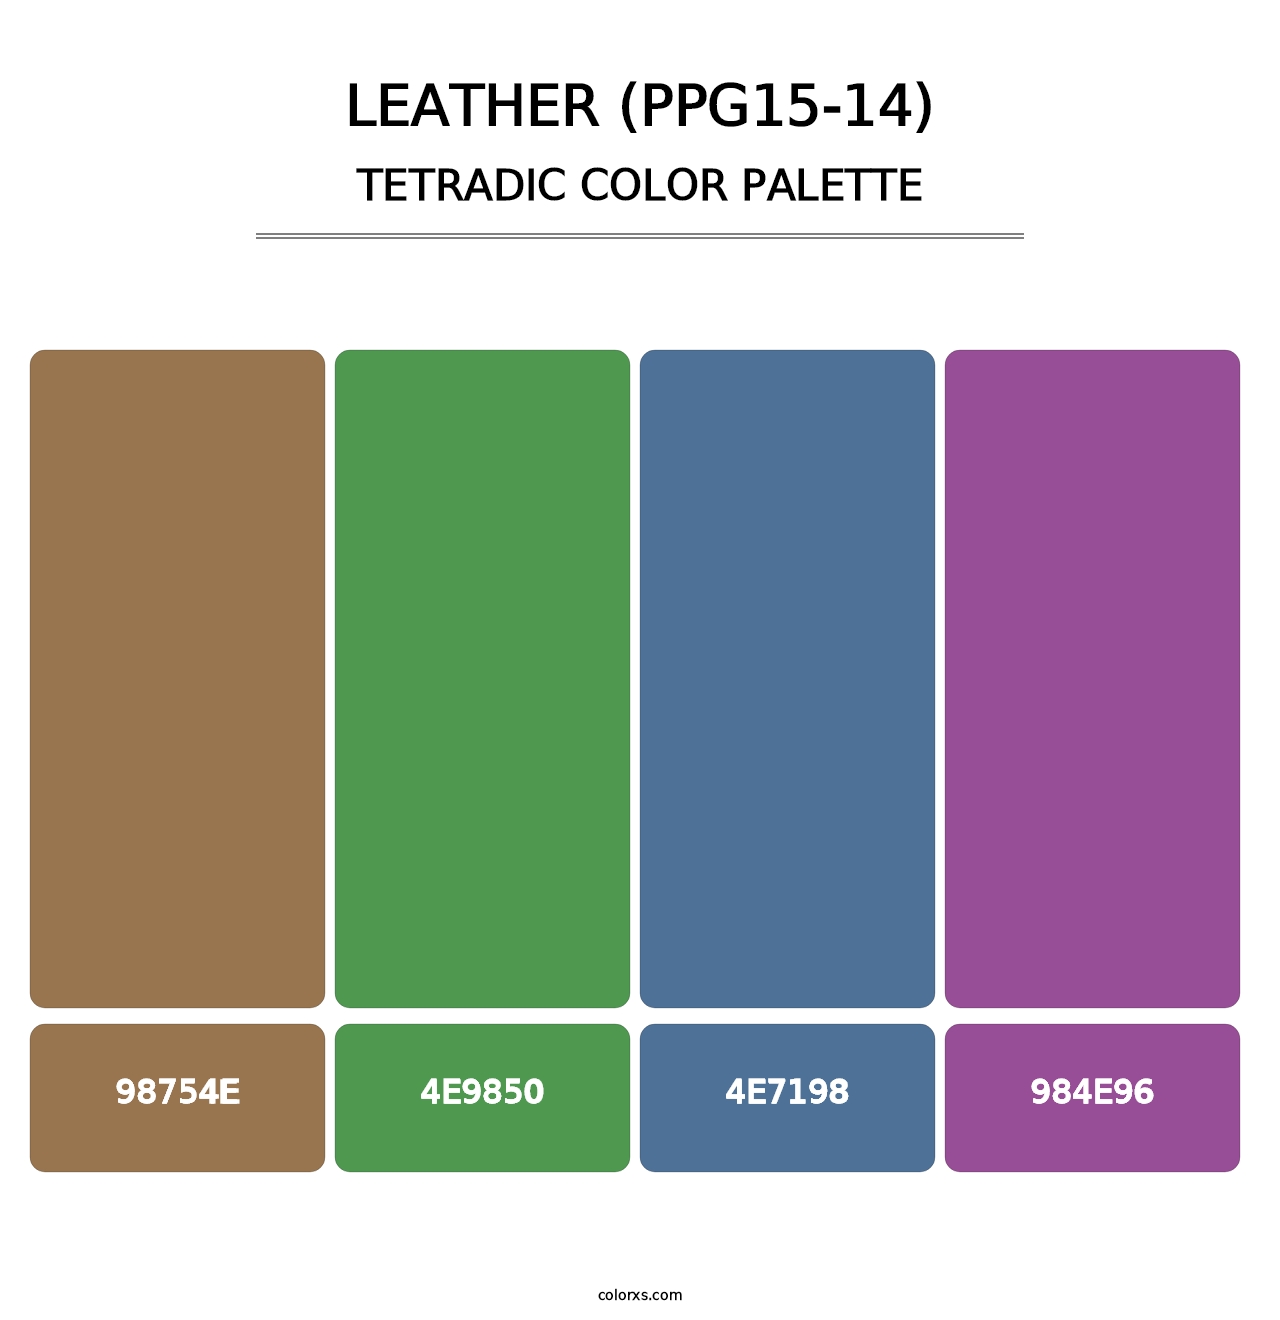 Leather (PPG15-14) - Tetradic Color Palette